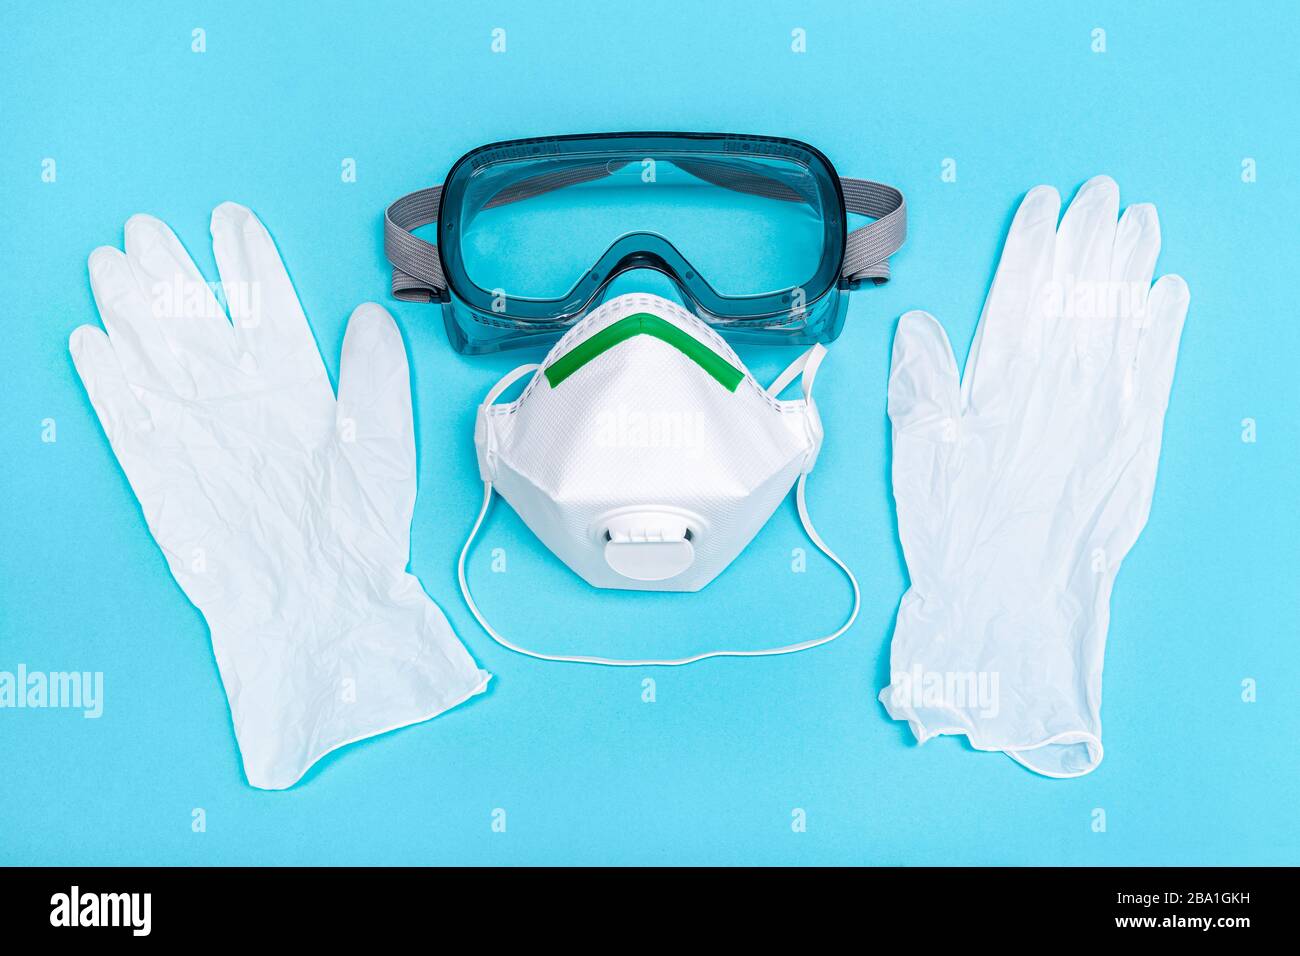 Safety equipment or Protective suit to fight to Coronavirus COVID-19 virus outbreak. Safety mask, protective gloves and glasses Stock Photo